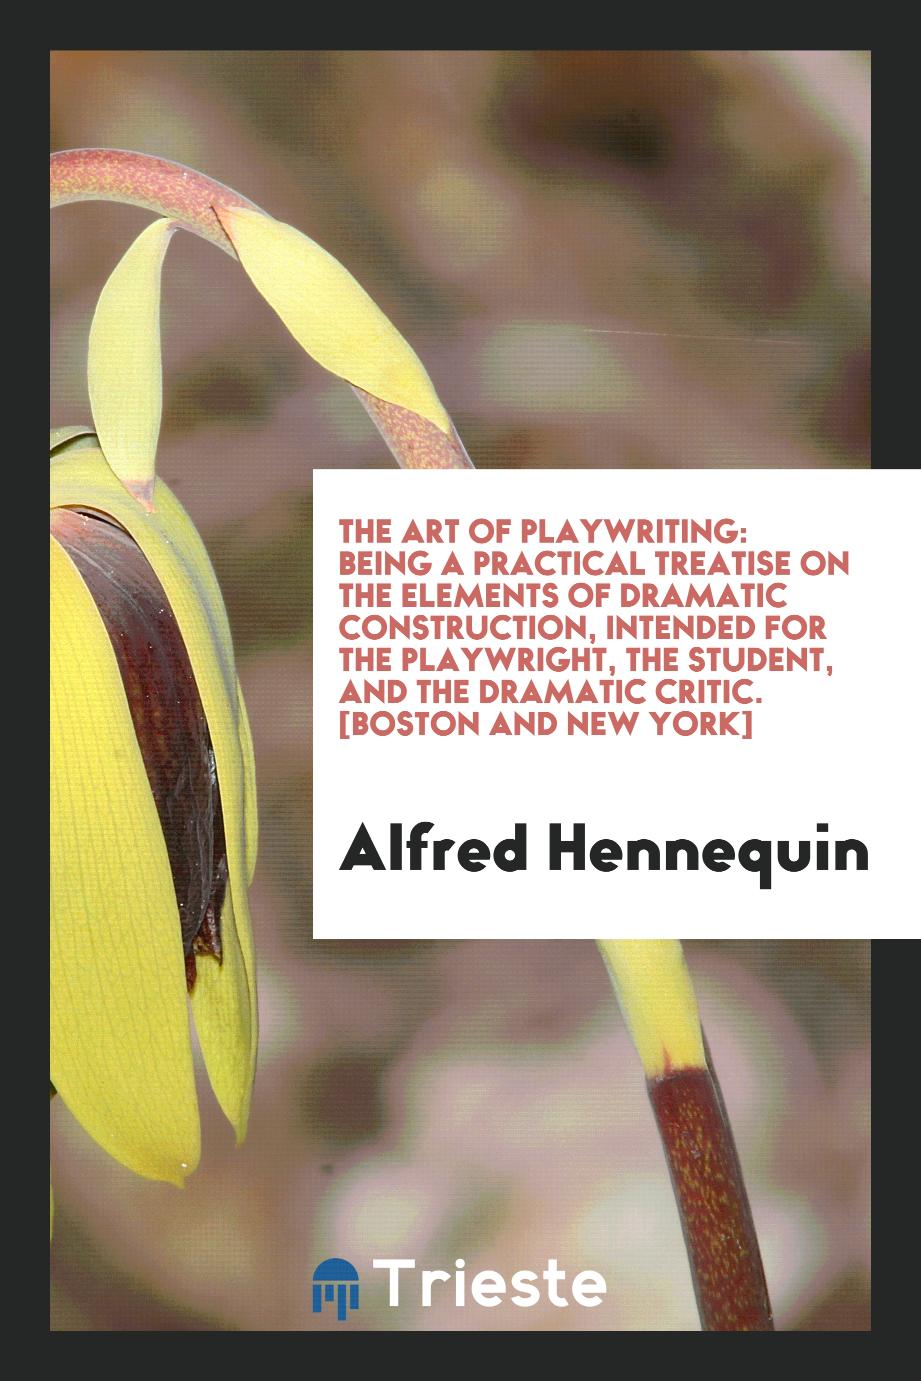 The Art of Playwriting: Being a Practical Treatise on the Elements of Dramatic Construction, Intended for the Playwright, the Student, and the Dramatic Critic. [Boston and New York]